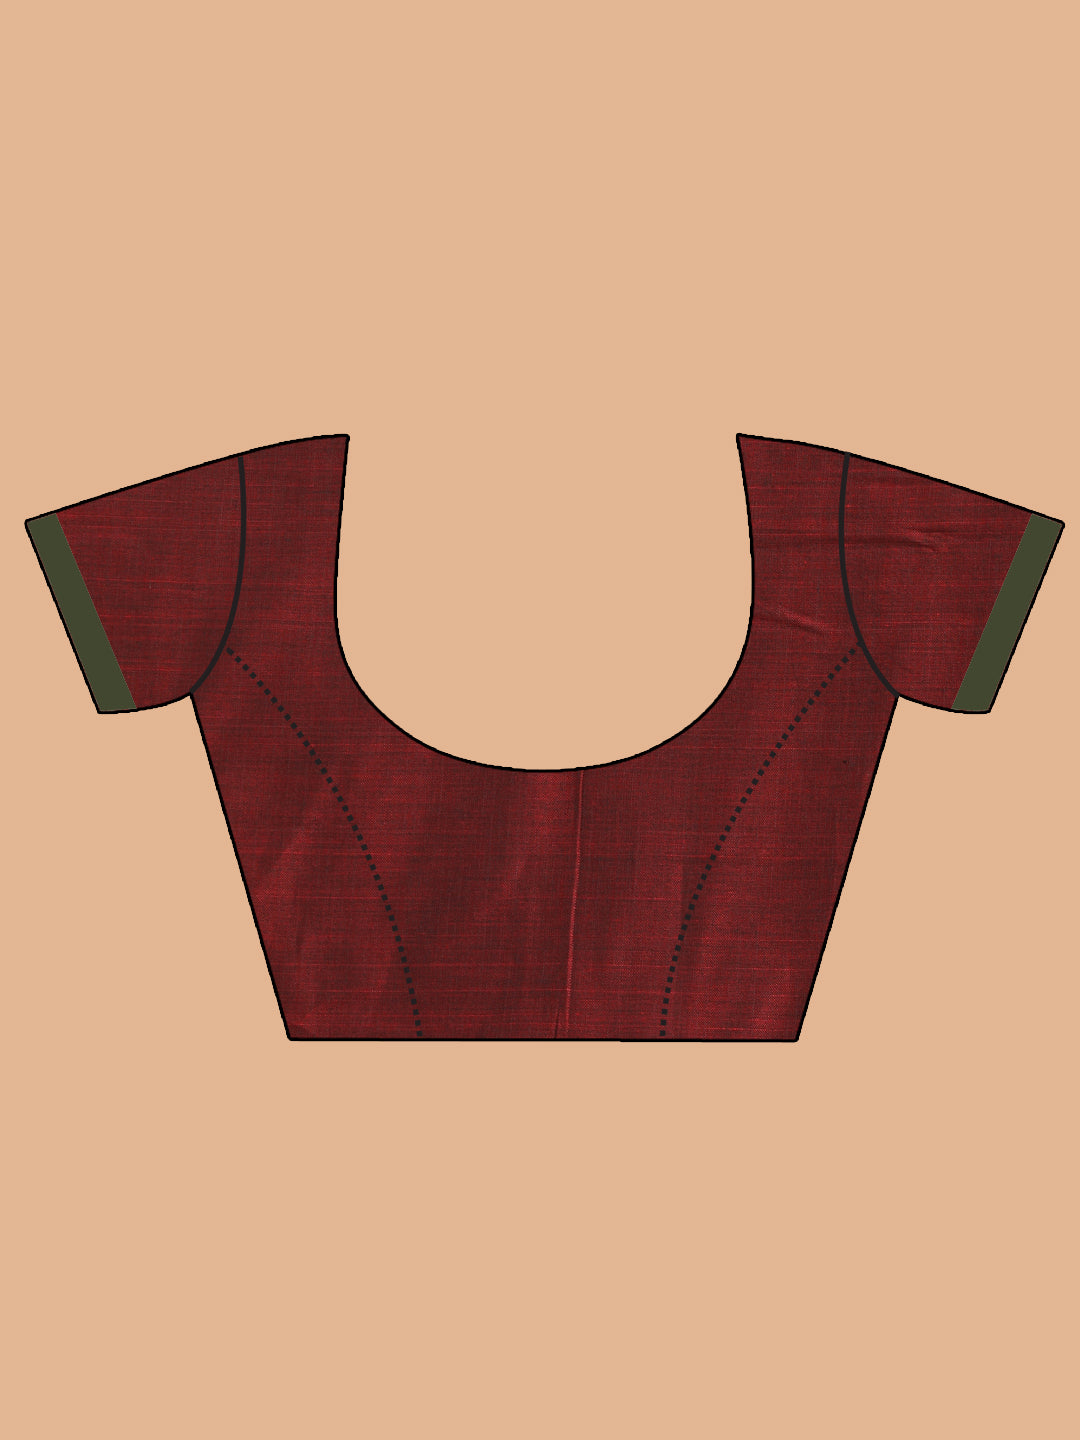 Indethnic Maroon Pure Cotton Woven Design Saree - Blouse Piece View